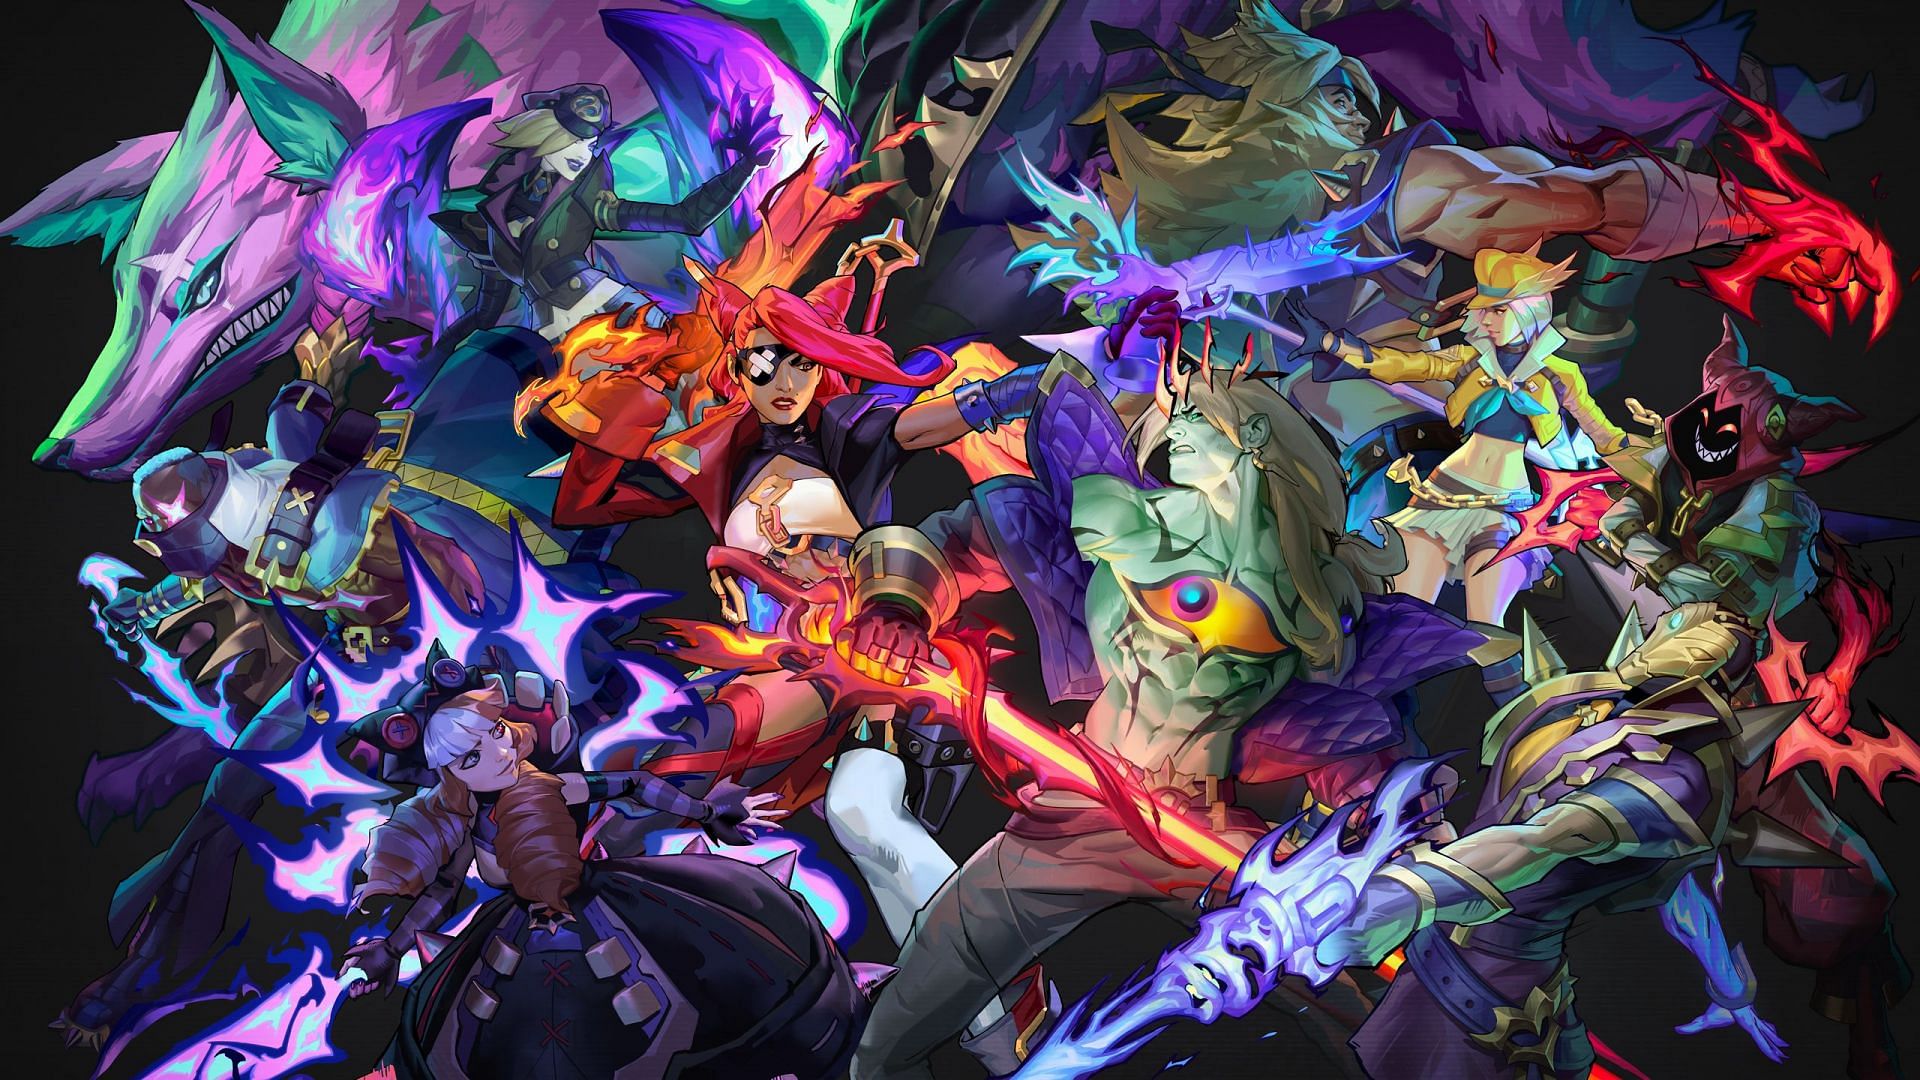 The champions in League of Legends clad with the newest skin, Soul Fighter